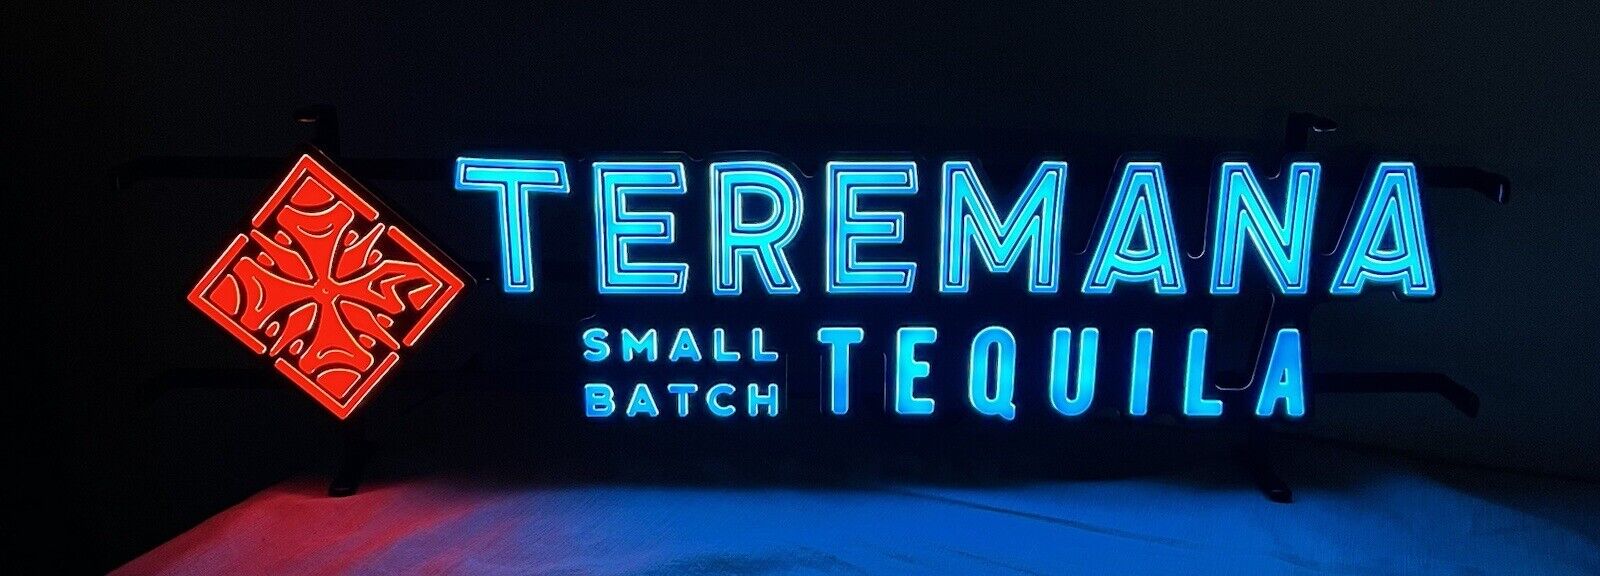 TEREMANA SMALL BATCH TEQUILA LED LIT LIGHTED WALL HANGING/ STANDING BAR PUB SIGN